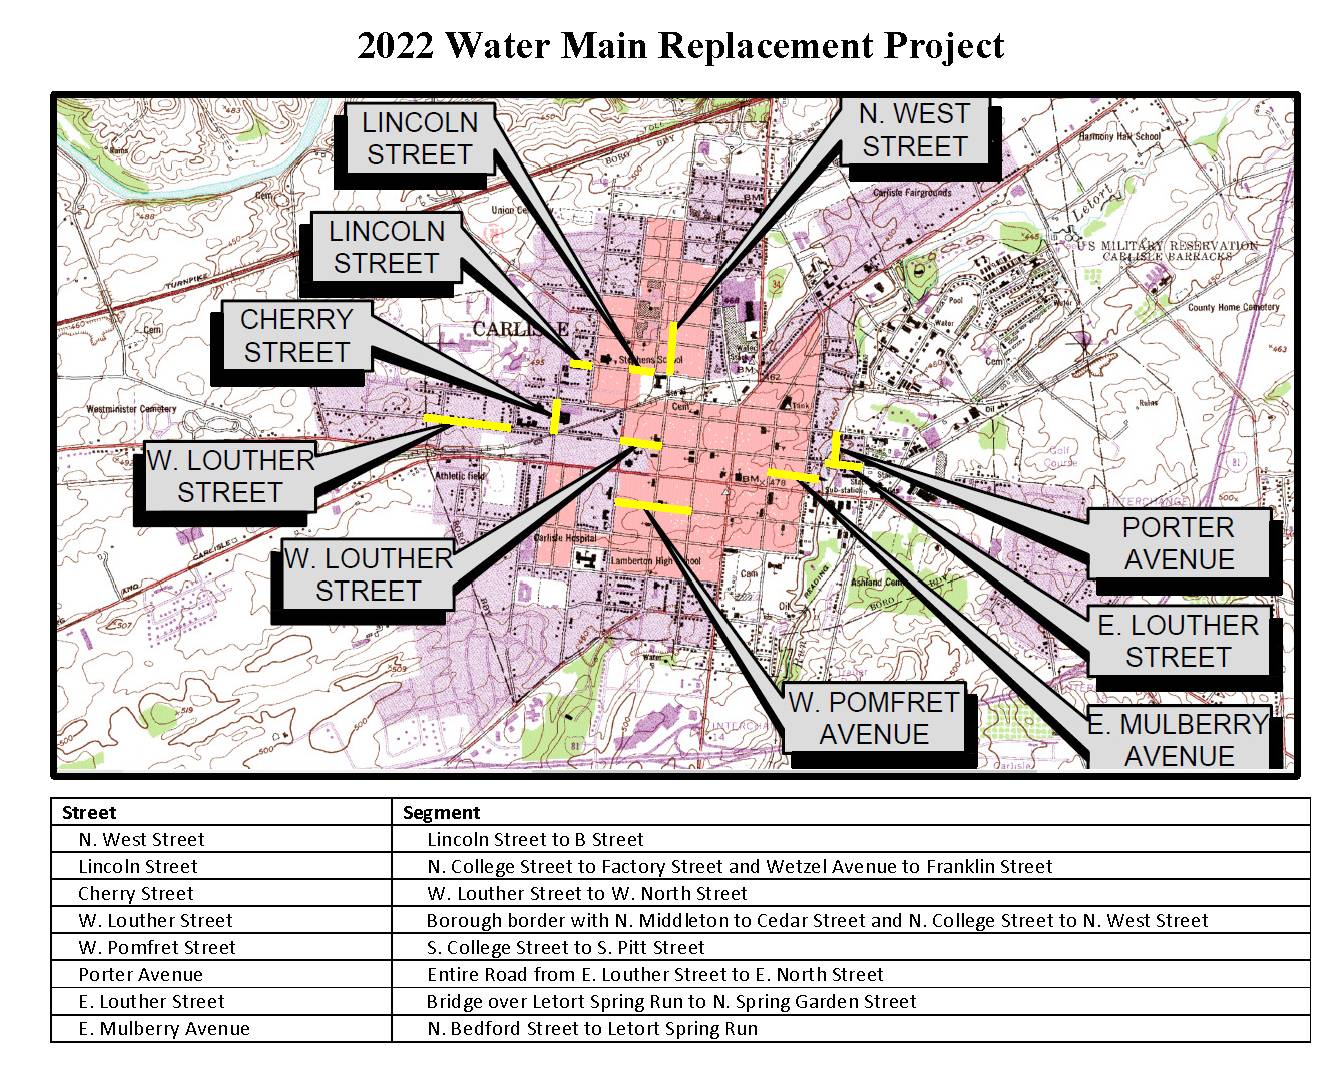 03 Award of 2022 Water Main Replacement Project Bid_Page_8 - Copy